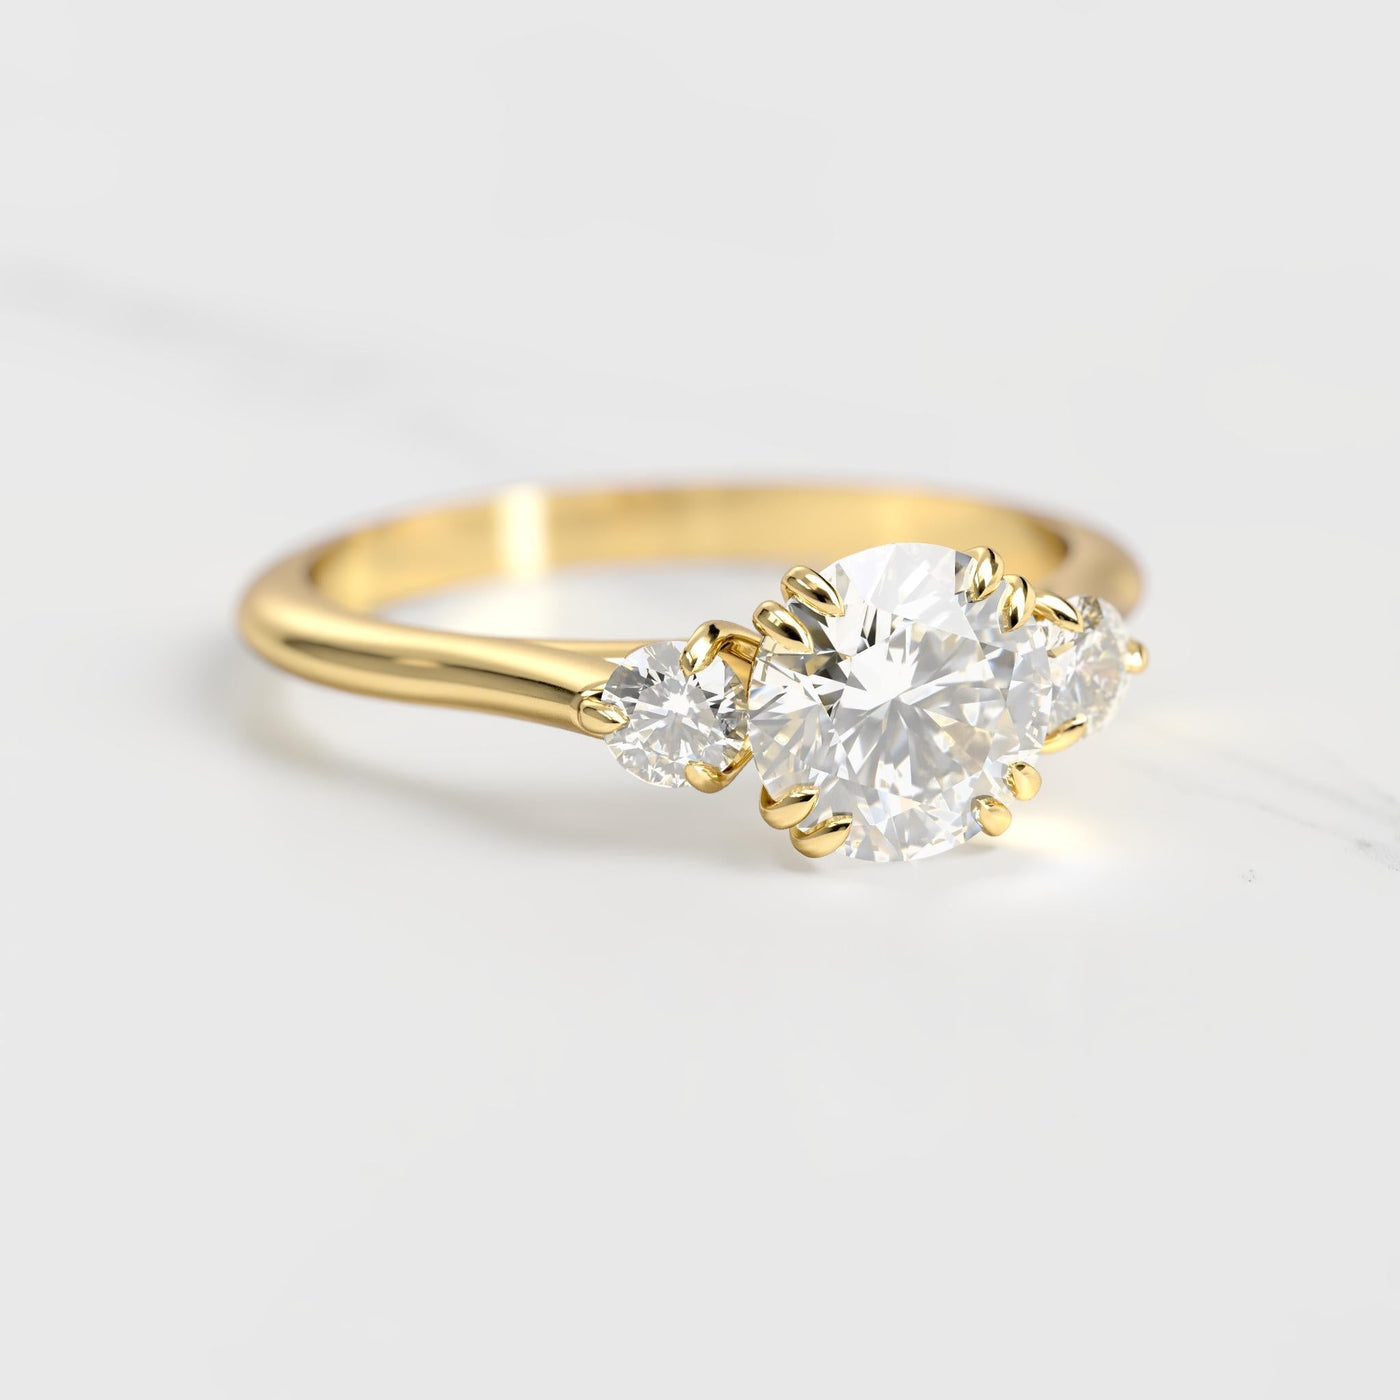 Round lab diamond ring with accent stones